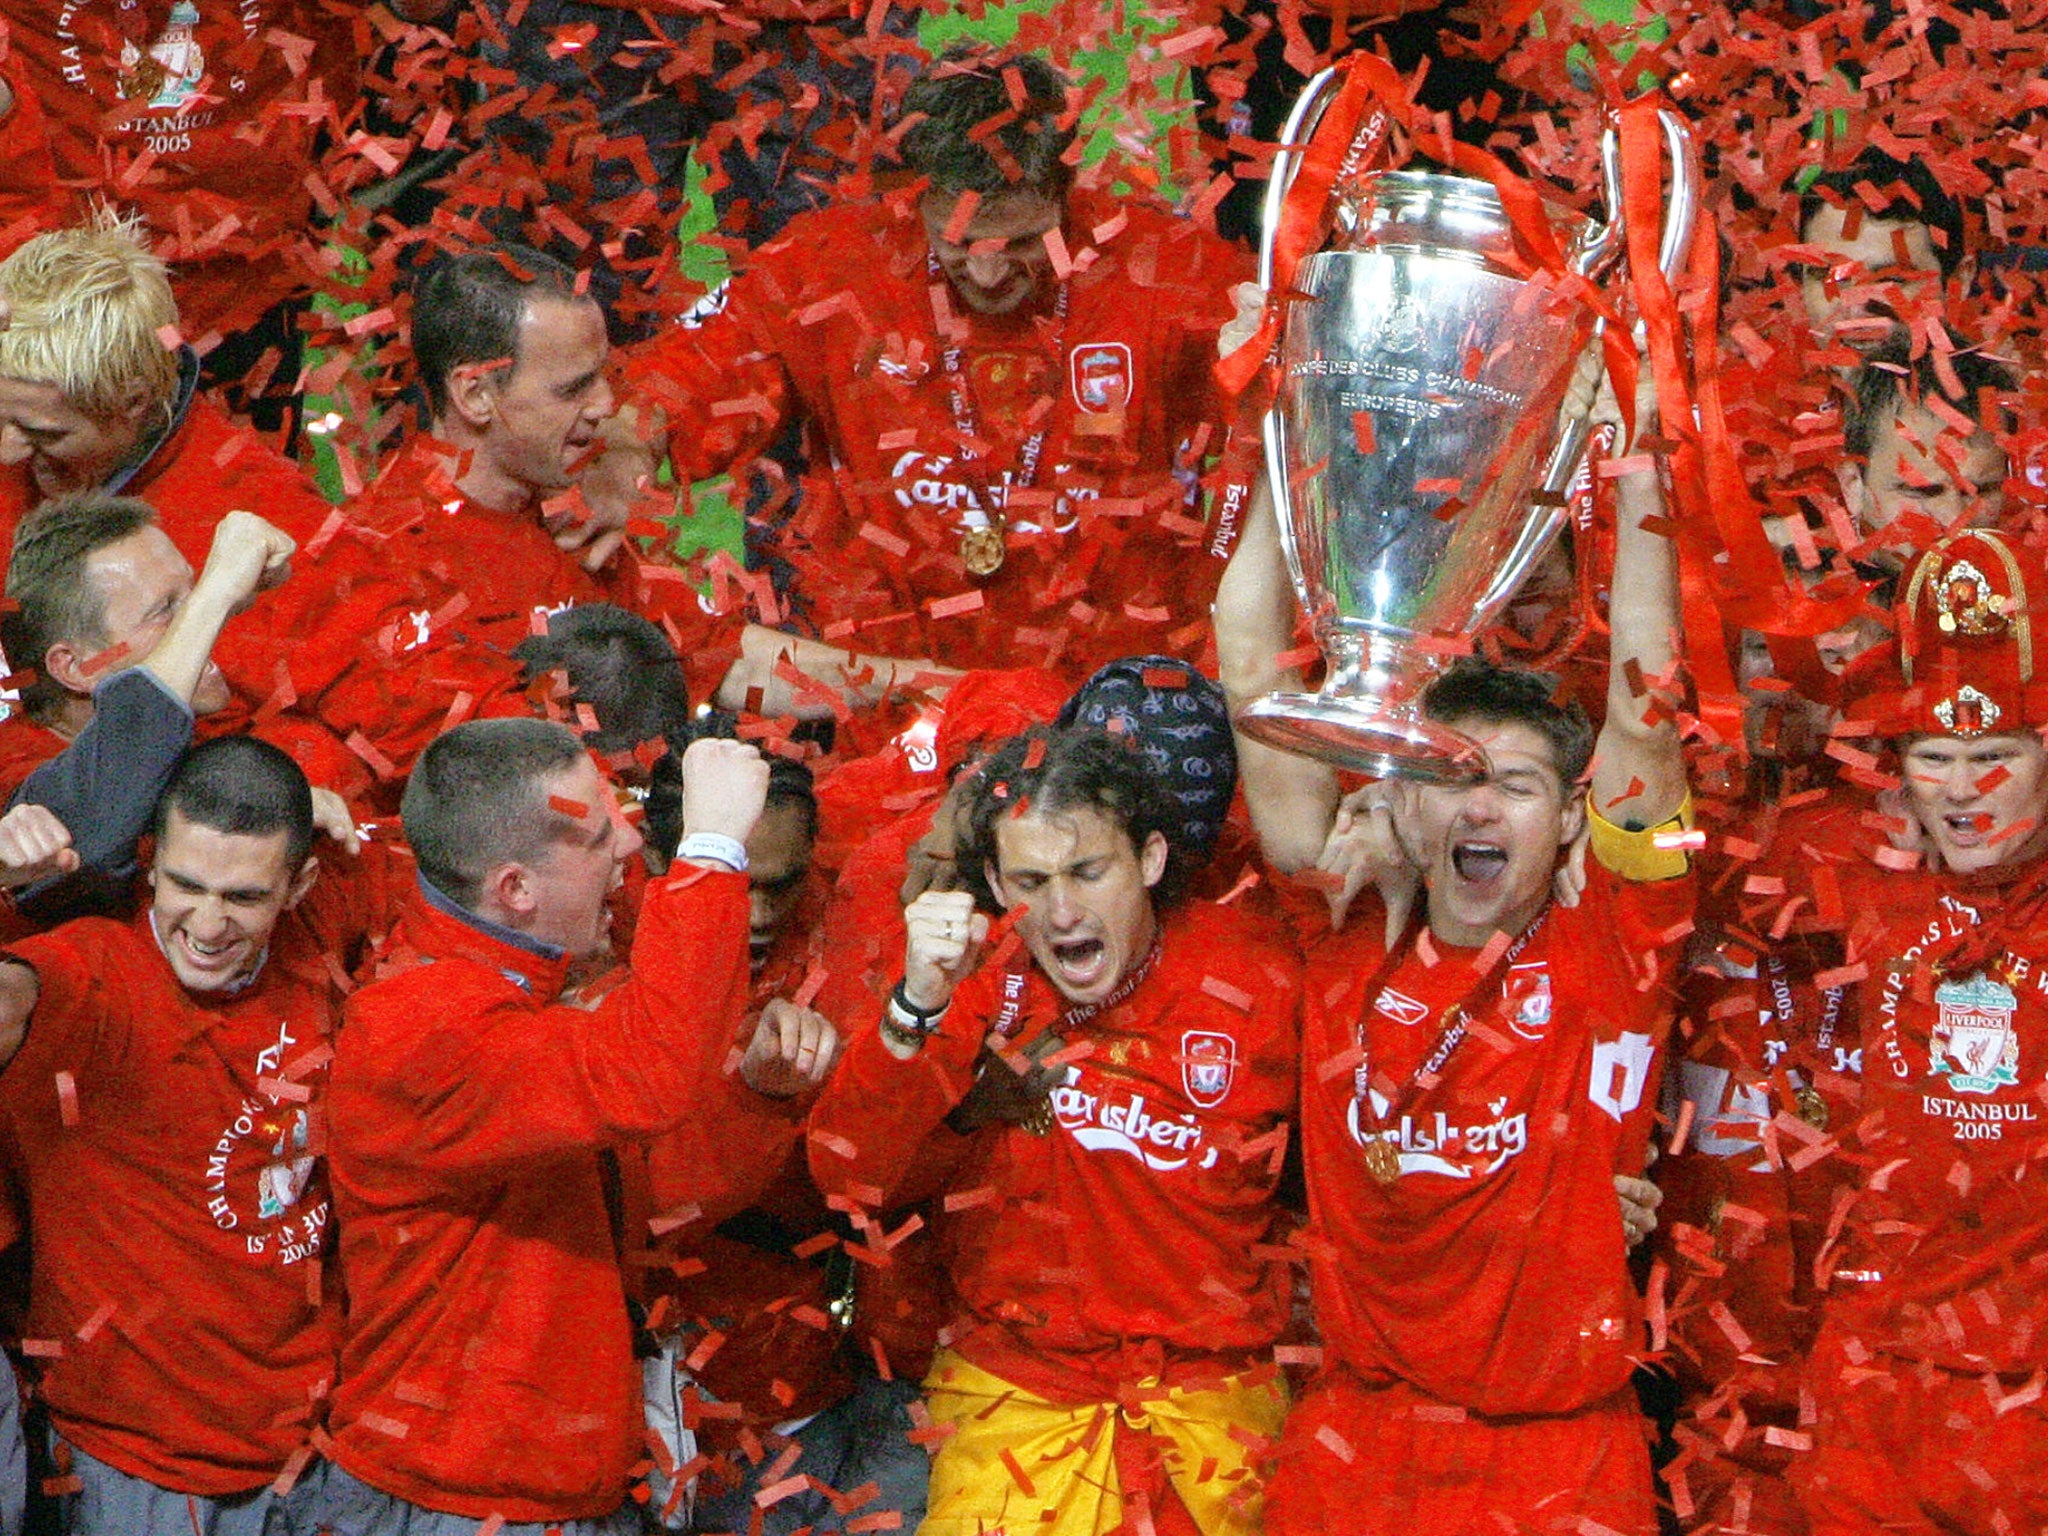 David Mannix (bottom left) after Liverpool’s 2005 Champions League victory